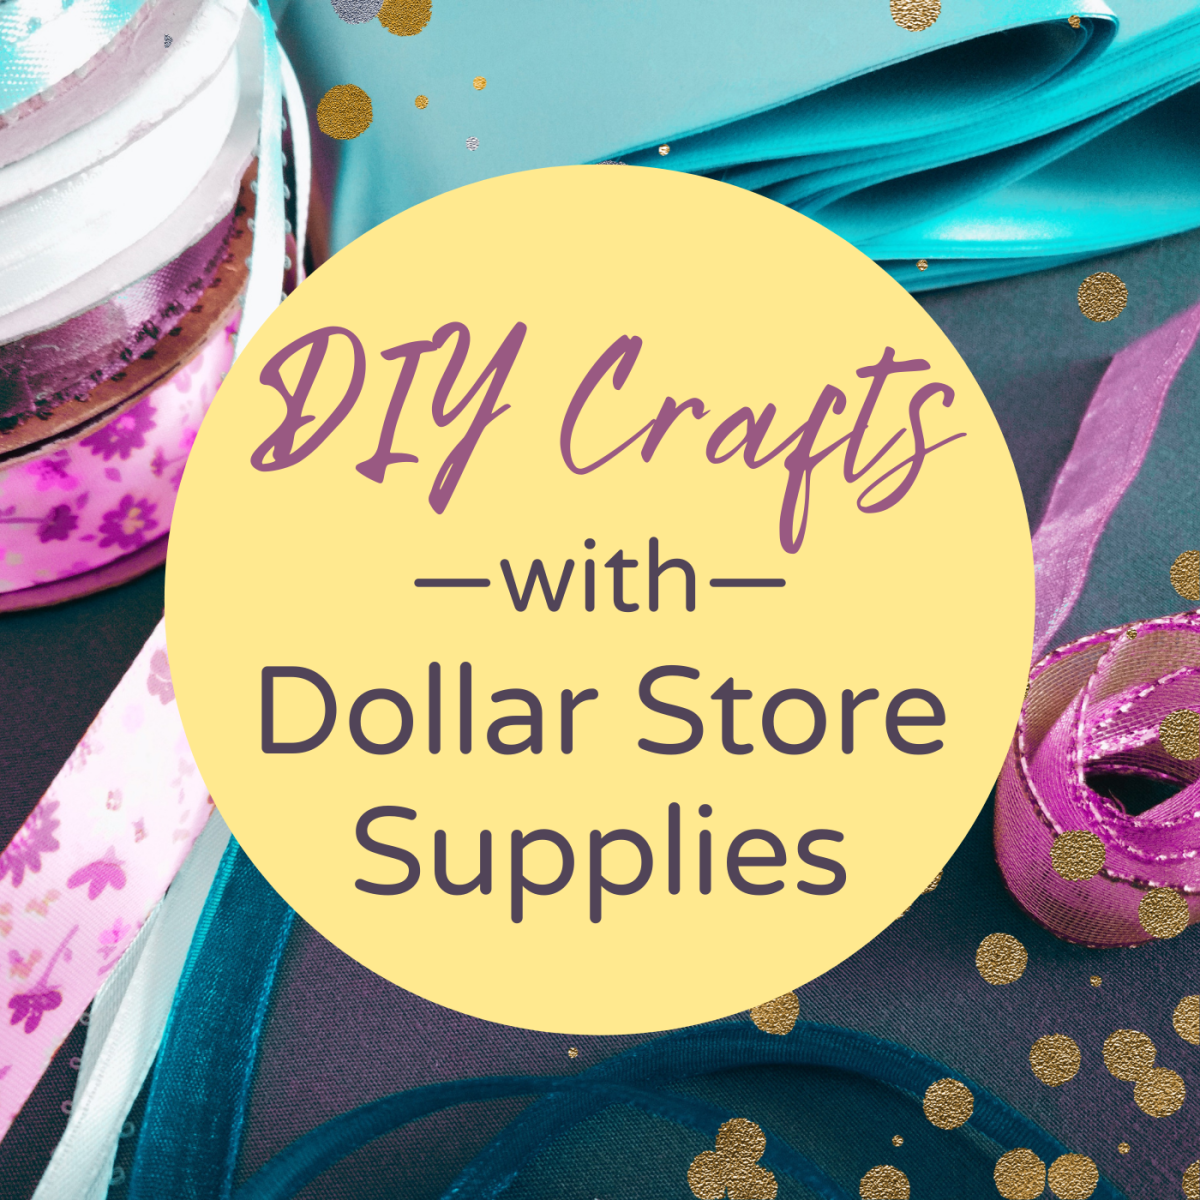 Save money on craft supplies by shopping at the dollar store. You won't believe what you can make!